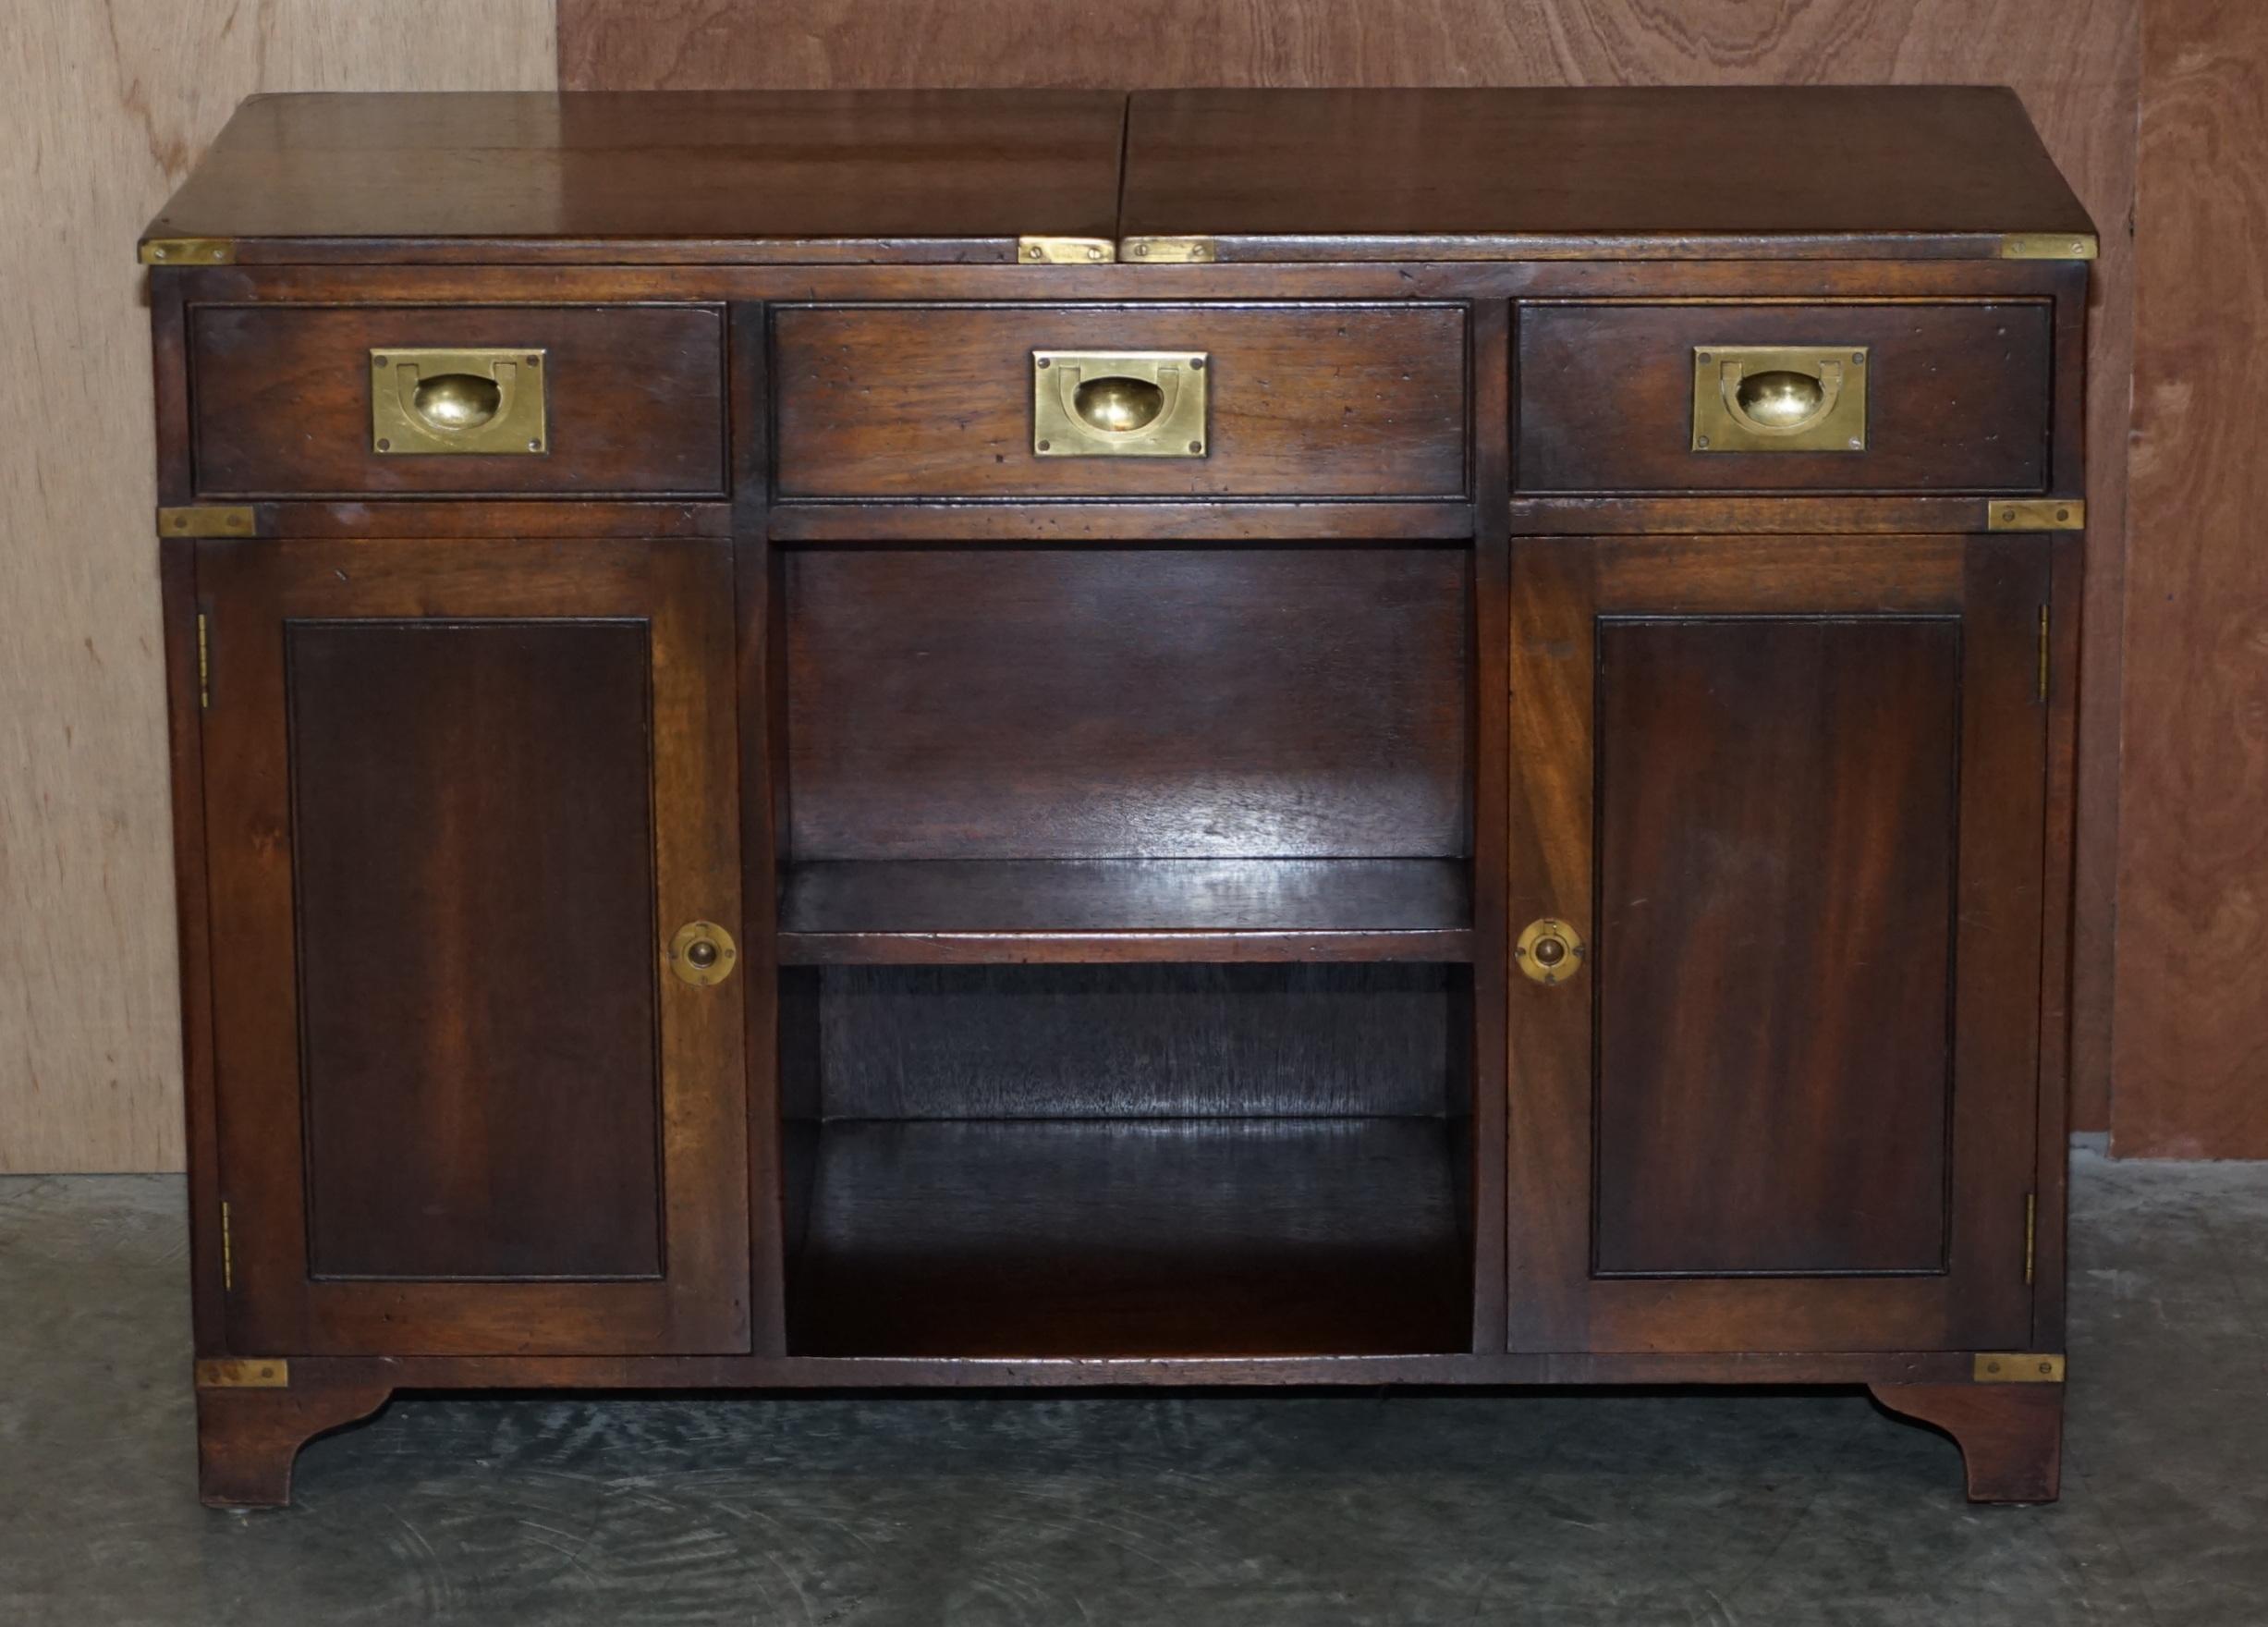 We are delighted to offer for sale this lovely R.E.H Kennedy made, Harrods London retailed military campaign drinks cabinet sideboard in mahogany with brass fittings

A good looking and well made piece. This is ideally suited as a drinks cabinet